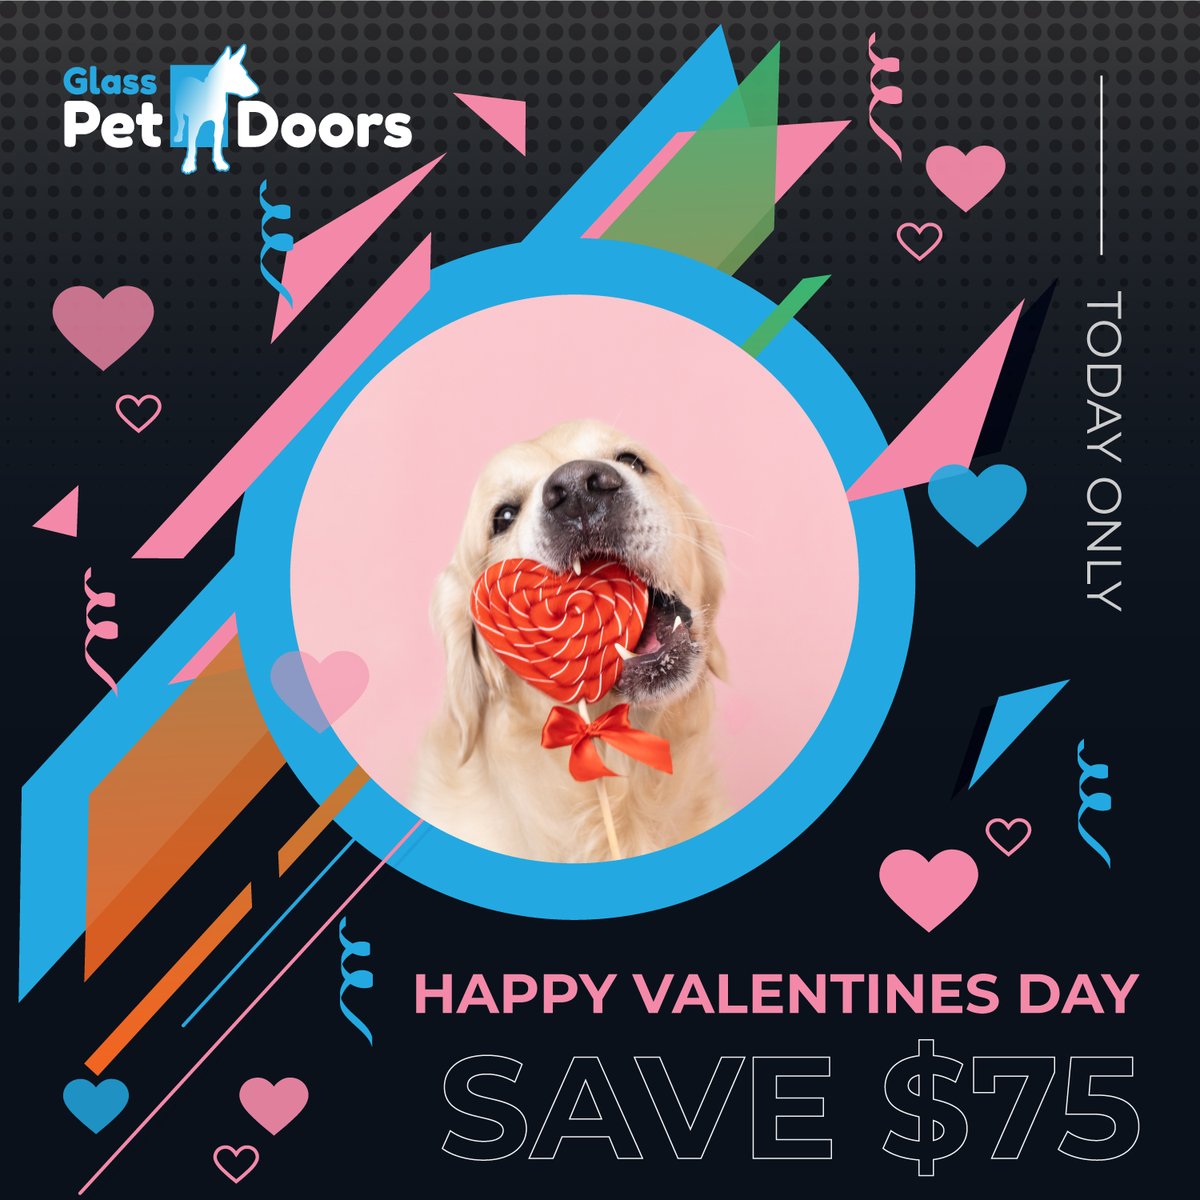 Valentine's Day special alert! Get $75 off our in-glass dog doors today only. Give your pup the freedom they deserve in style. Don't miss out! 🐾💕#ValentinesDaySpecial #DogDoors #PetFreedom #FurryFriends #PetLove #SpecialOffer #PetFriendlyHome #ValentinesDaySale #DogLovers